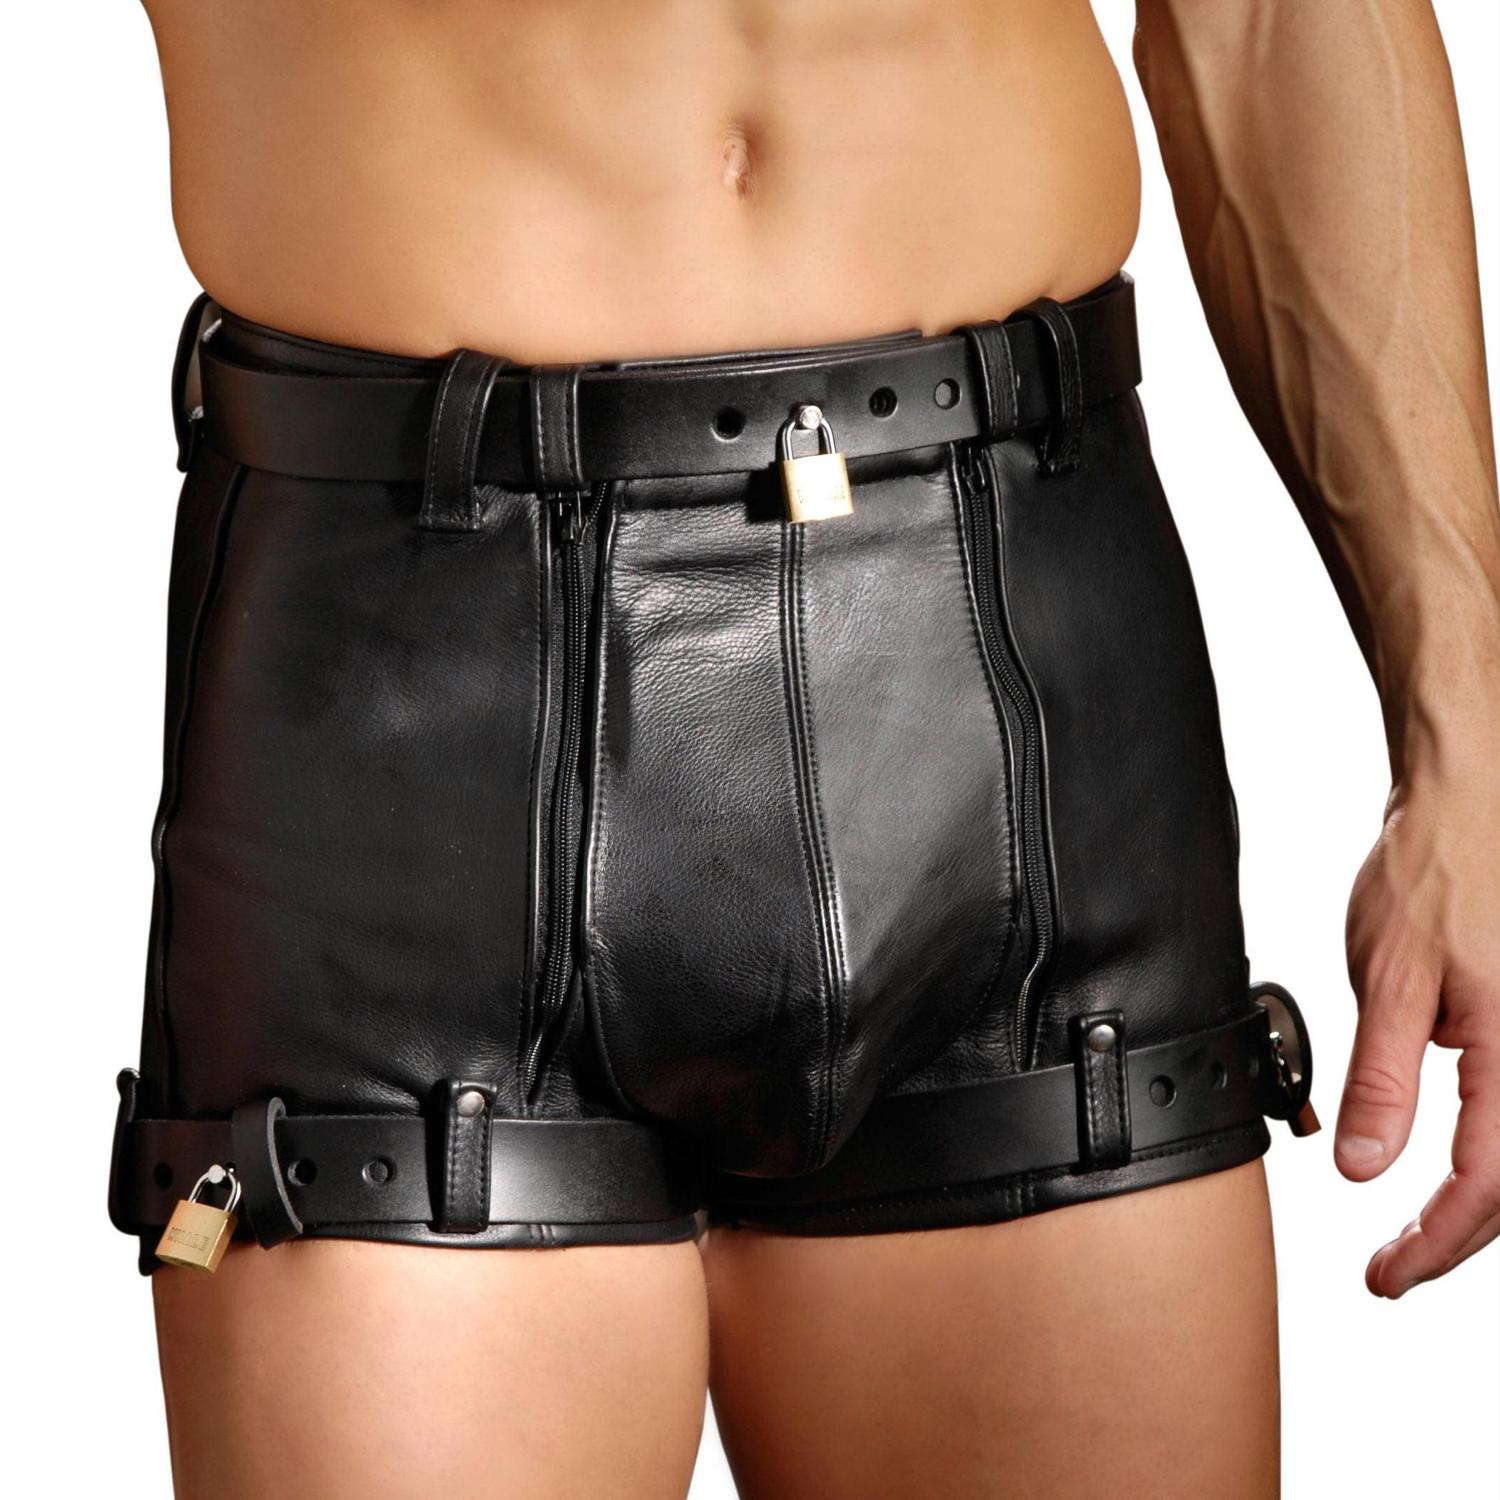 Strict Leather Chastity Shorts